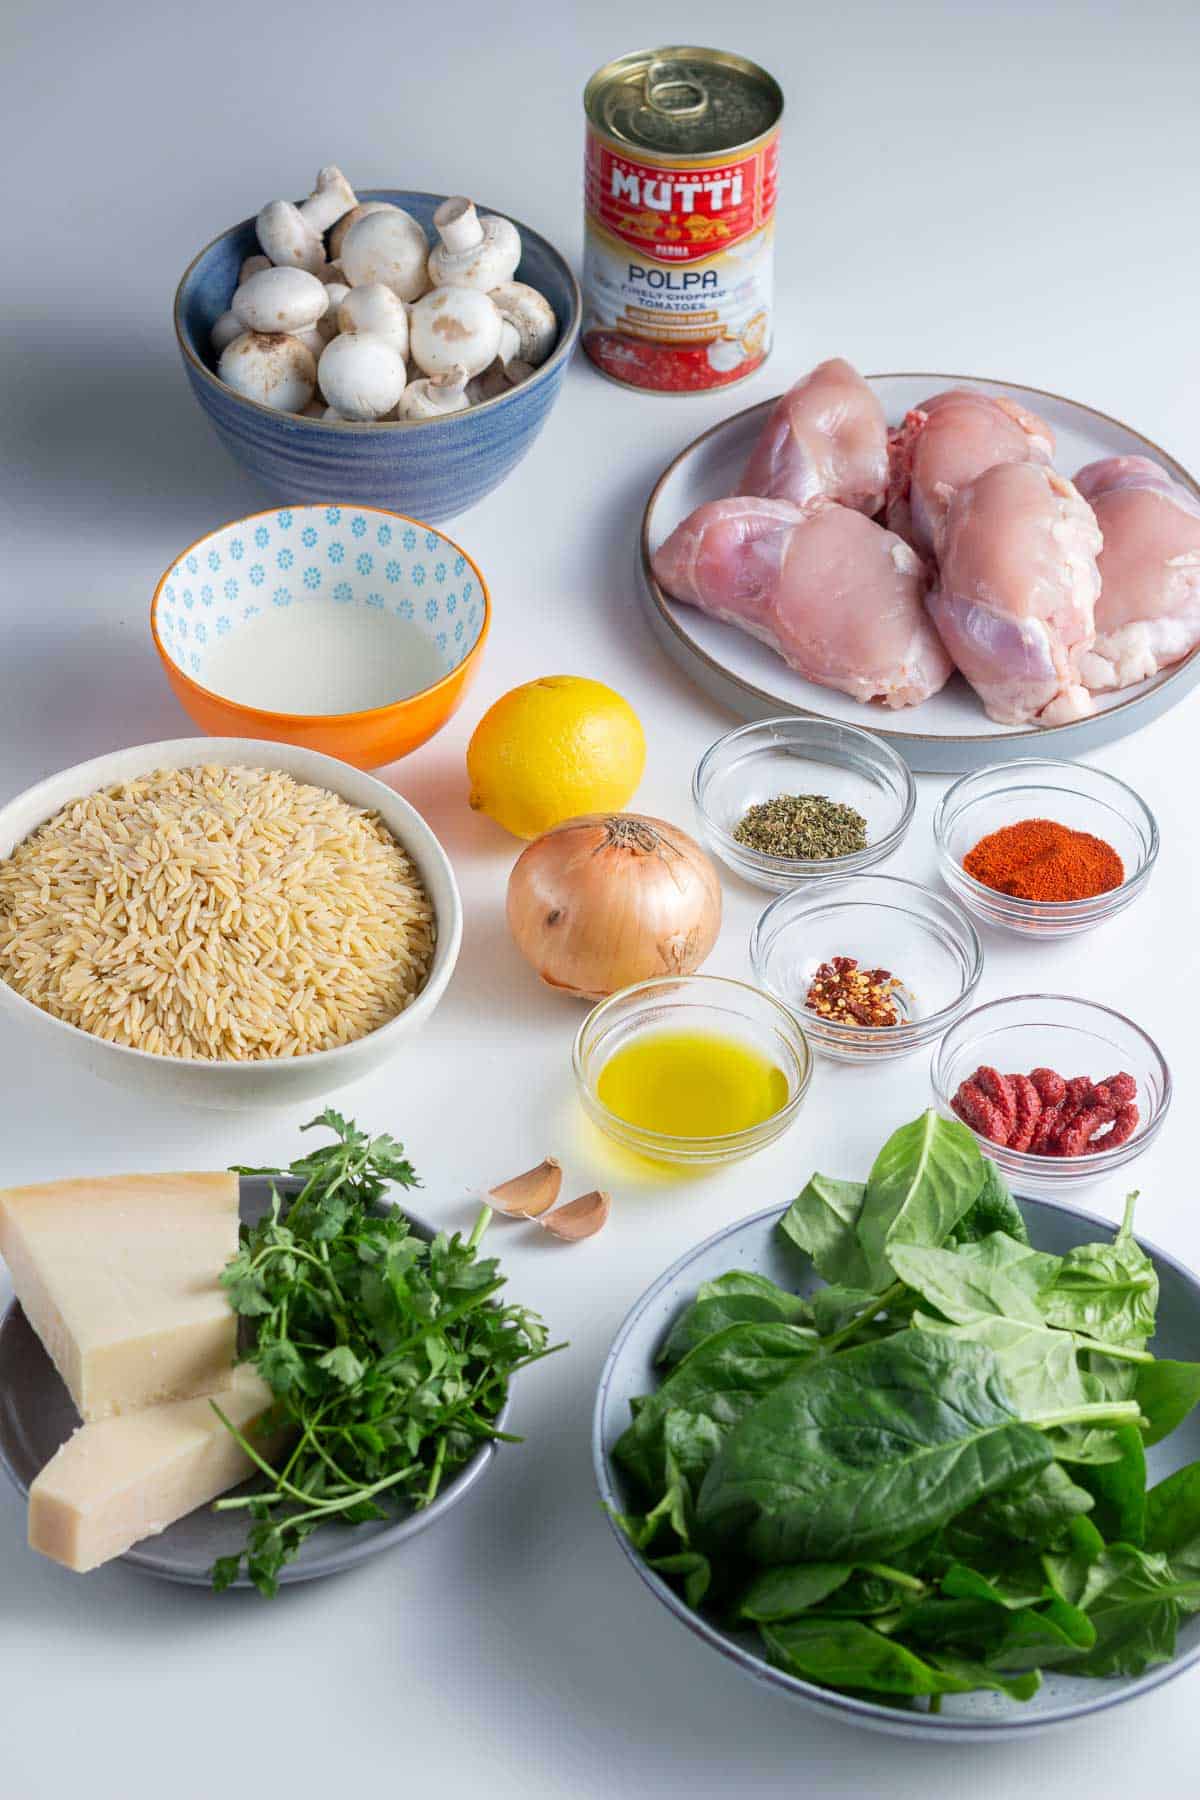 Ingredients laid out on a white background